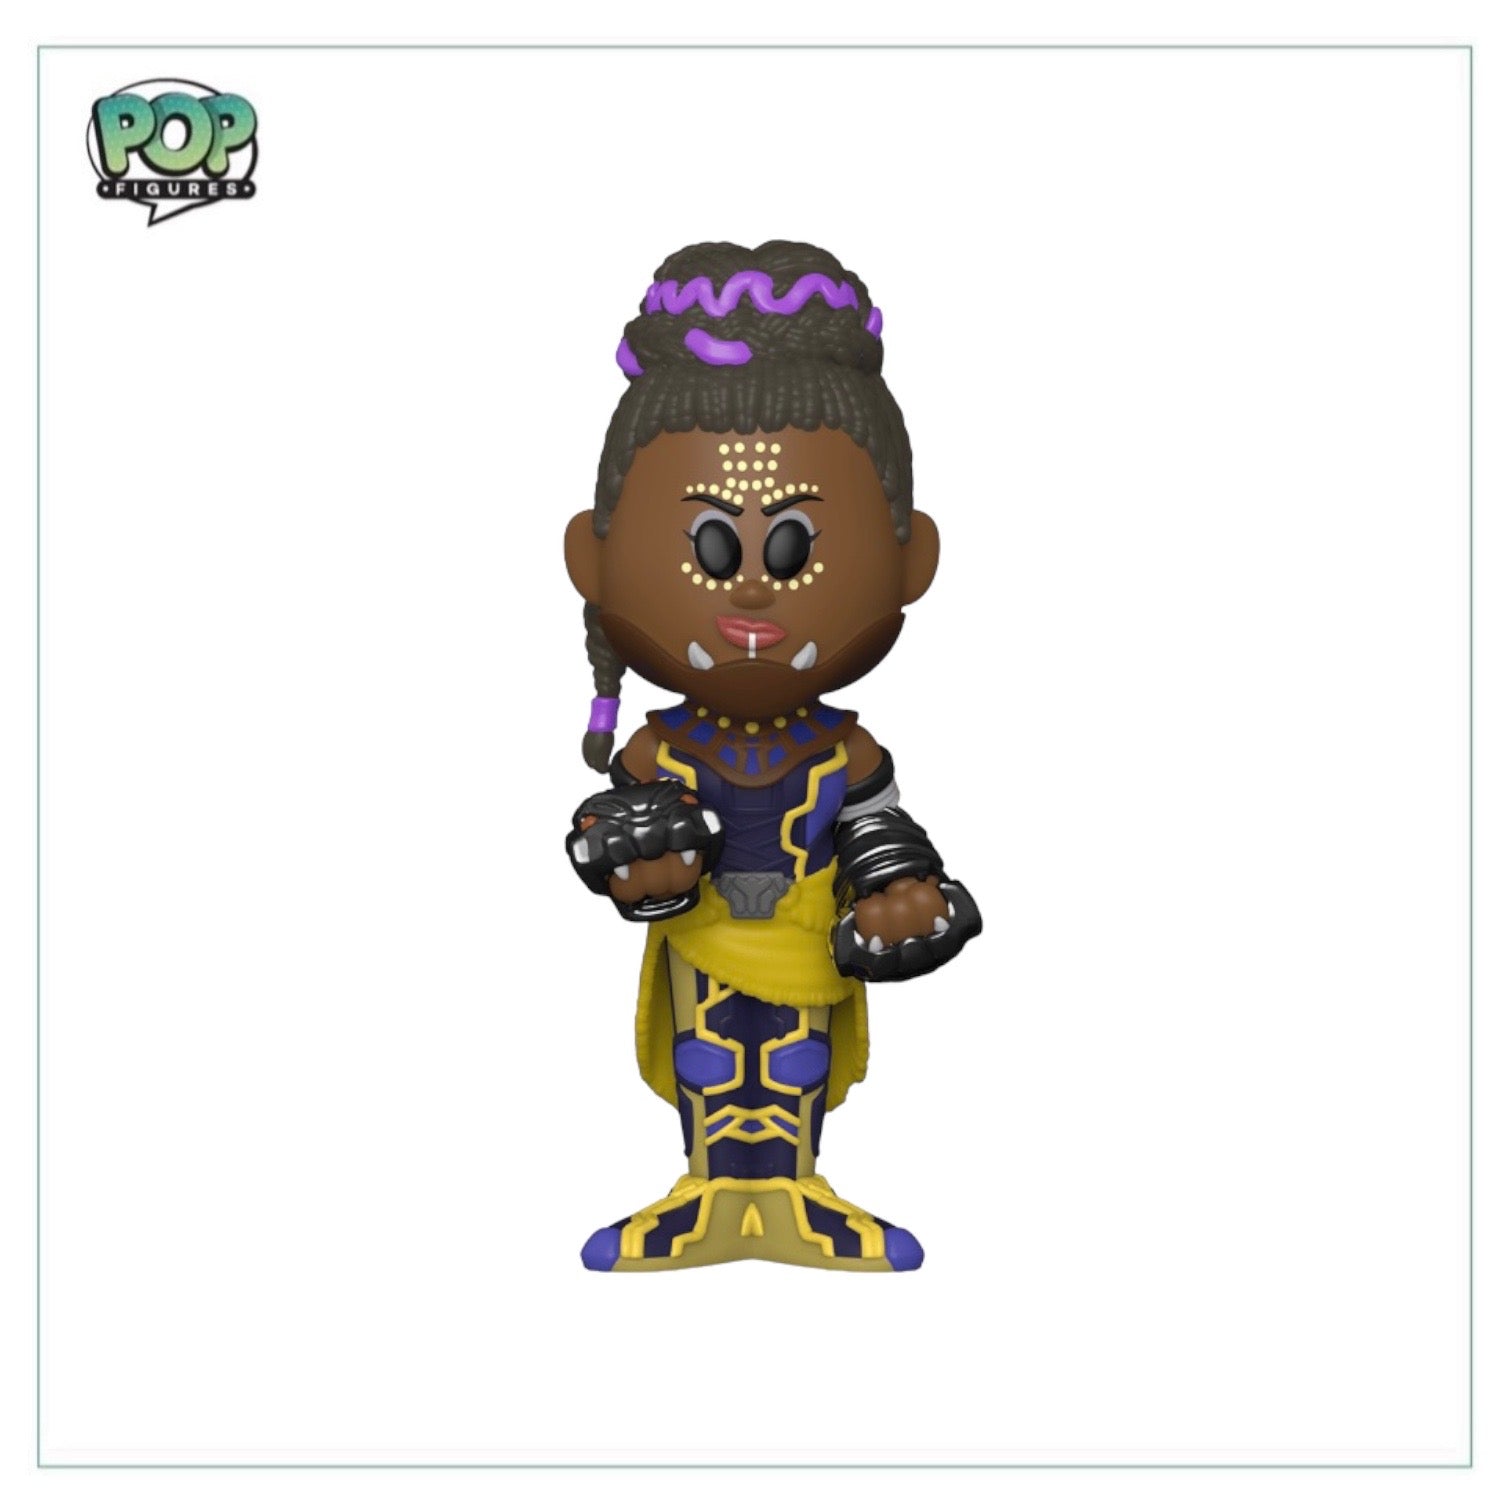 Shuri Funko Soda Vinyl Figure! - Black Panther - International NYCC 2022 Shared Exclusive LE12500 Pcs - Chance of Chase